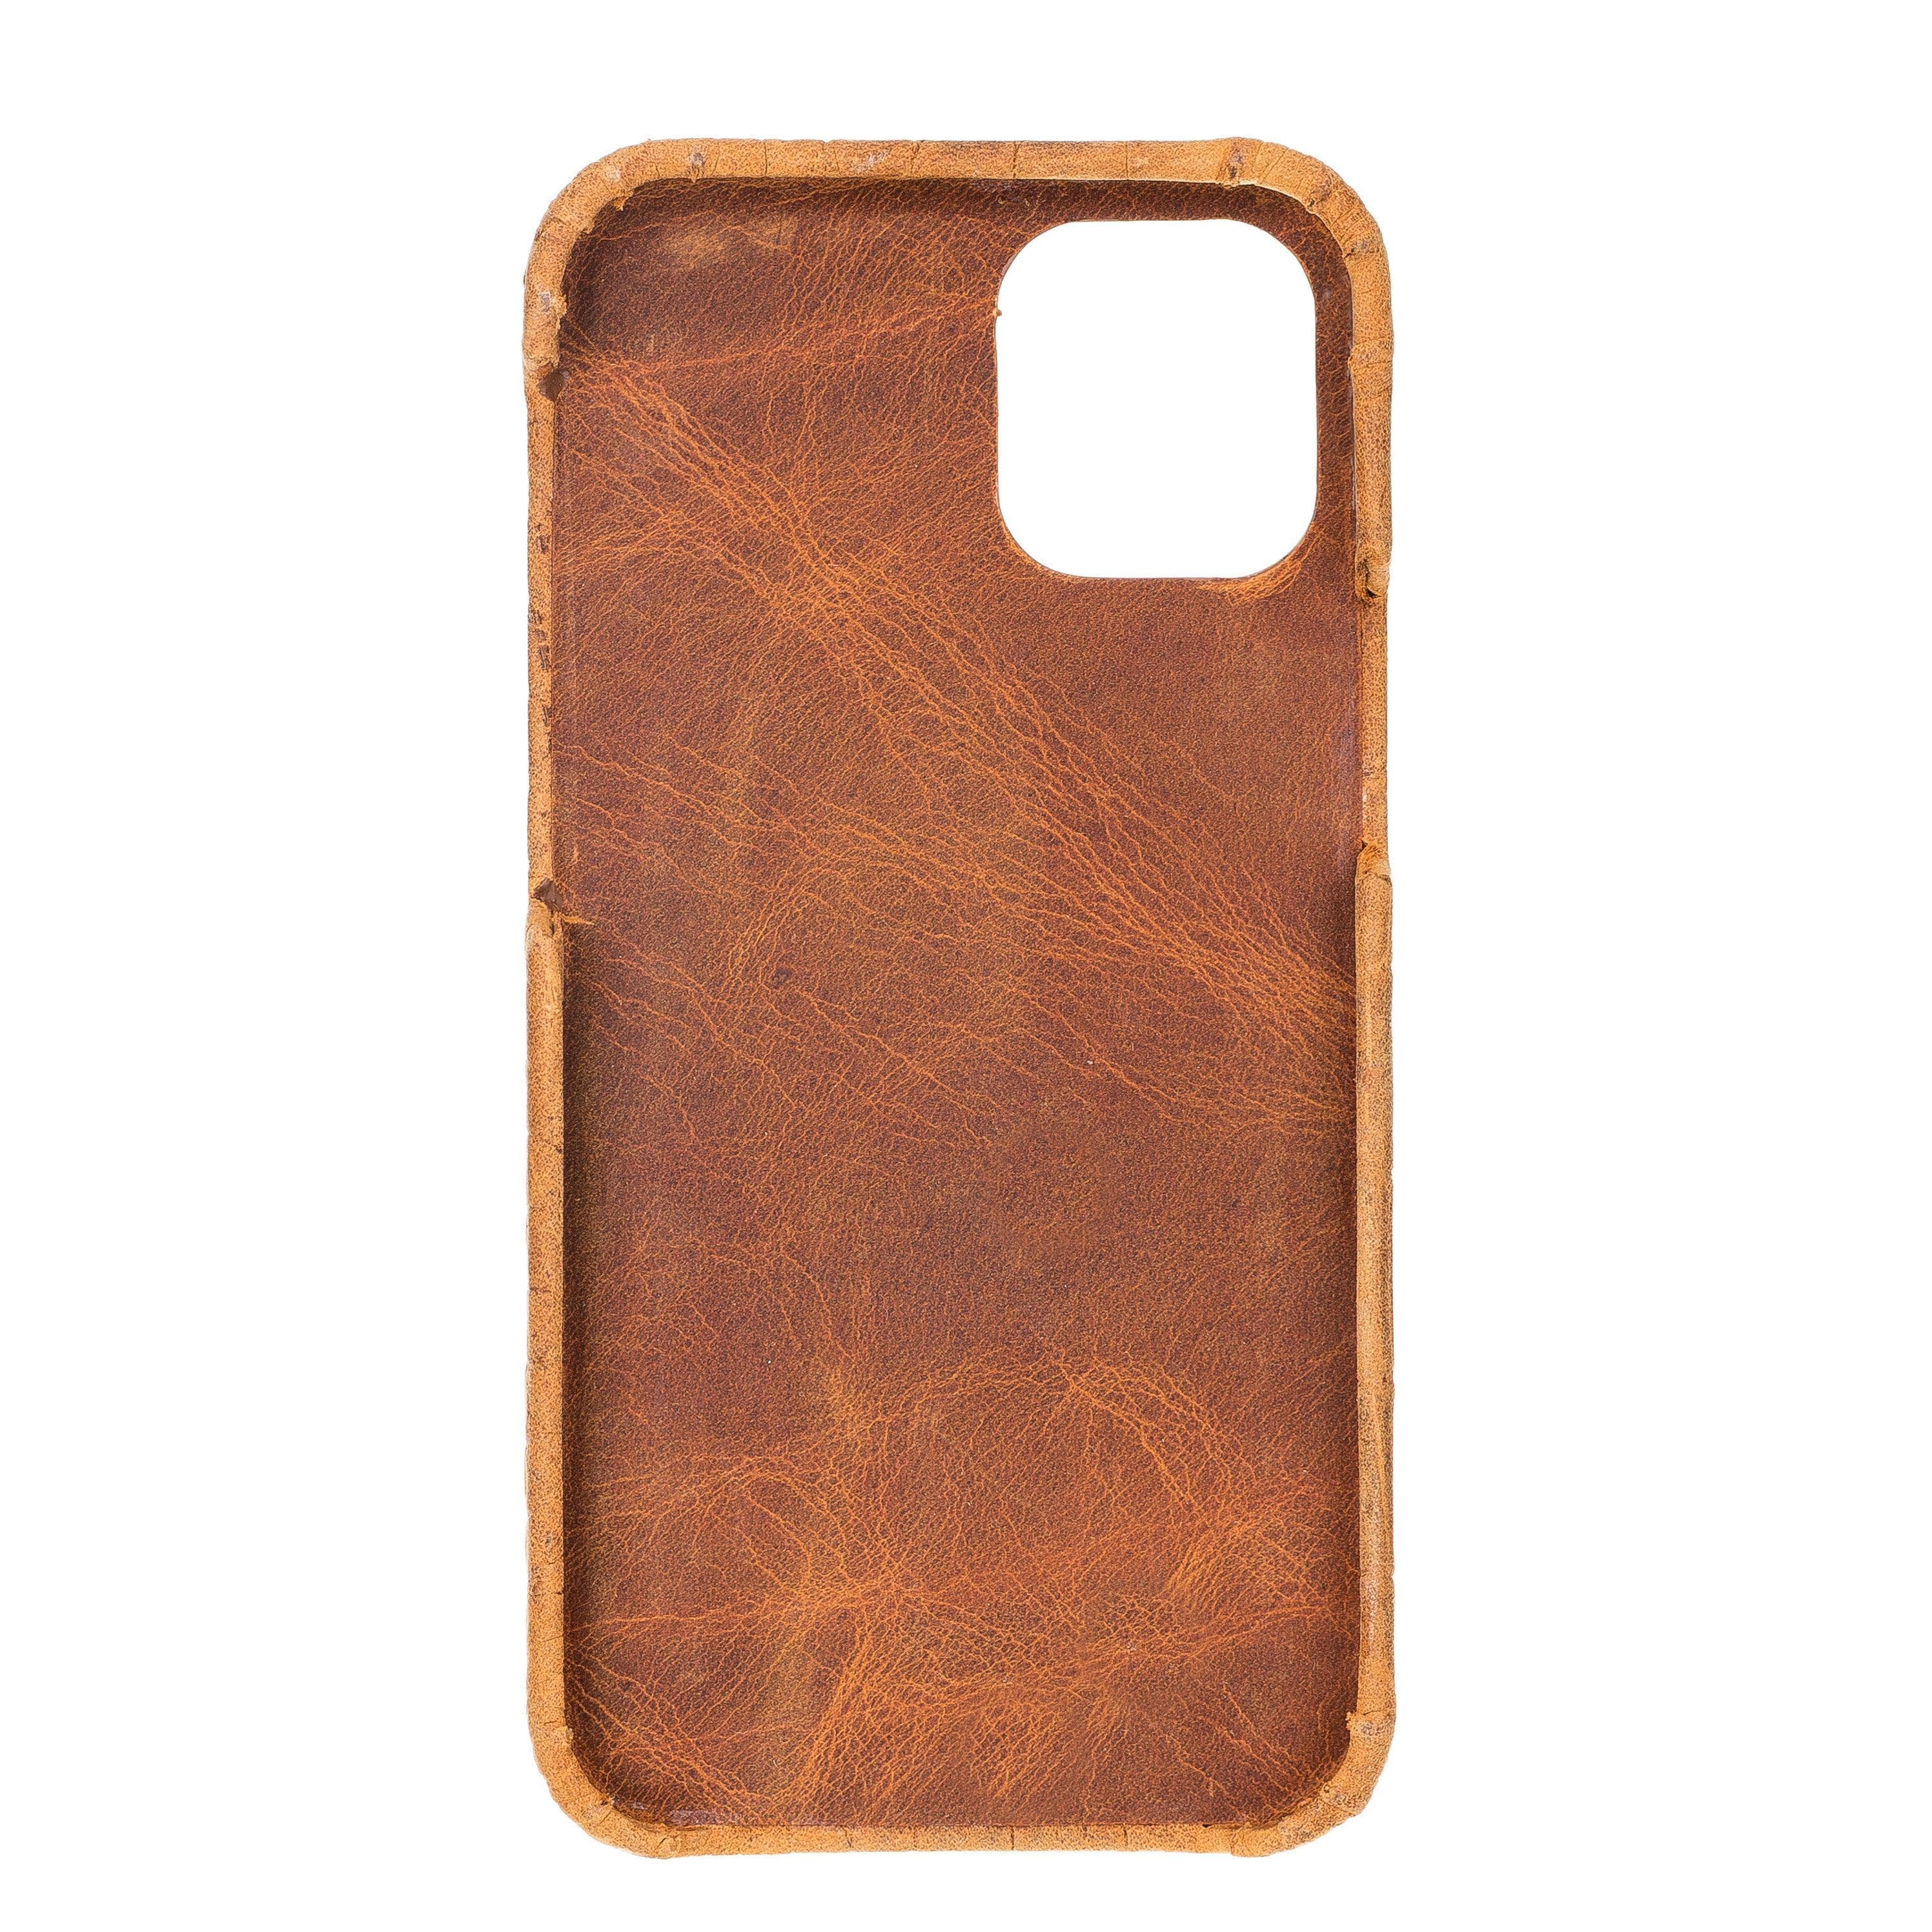 Fully Leather Back Cover for Apple iPhone 12 Series Bouletta LTD